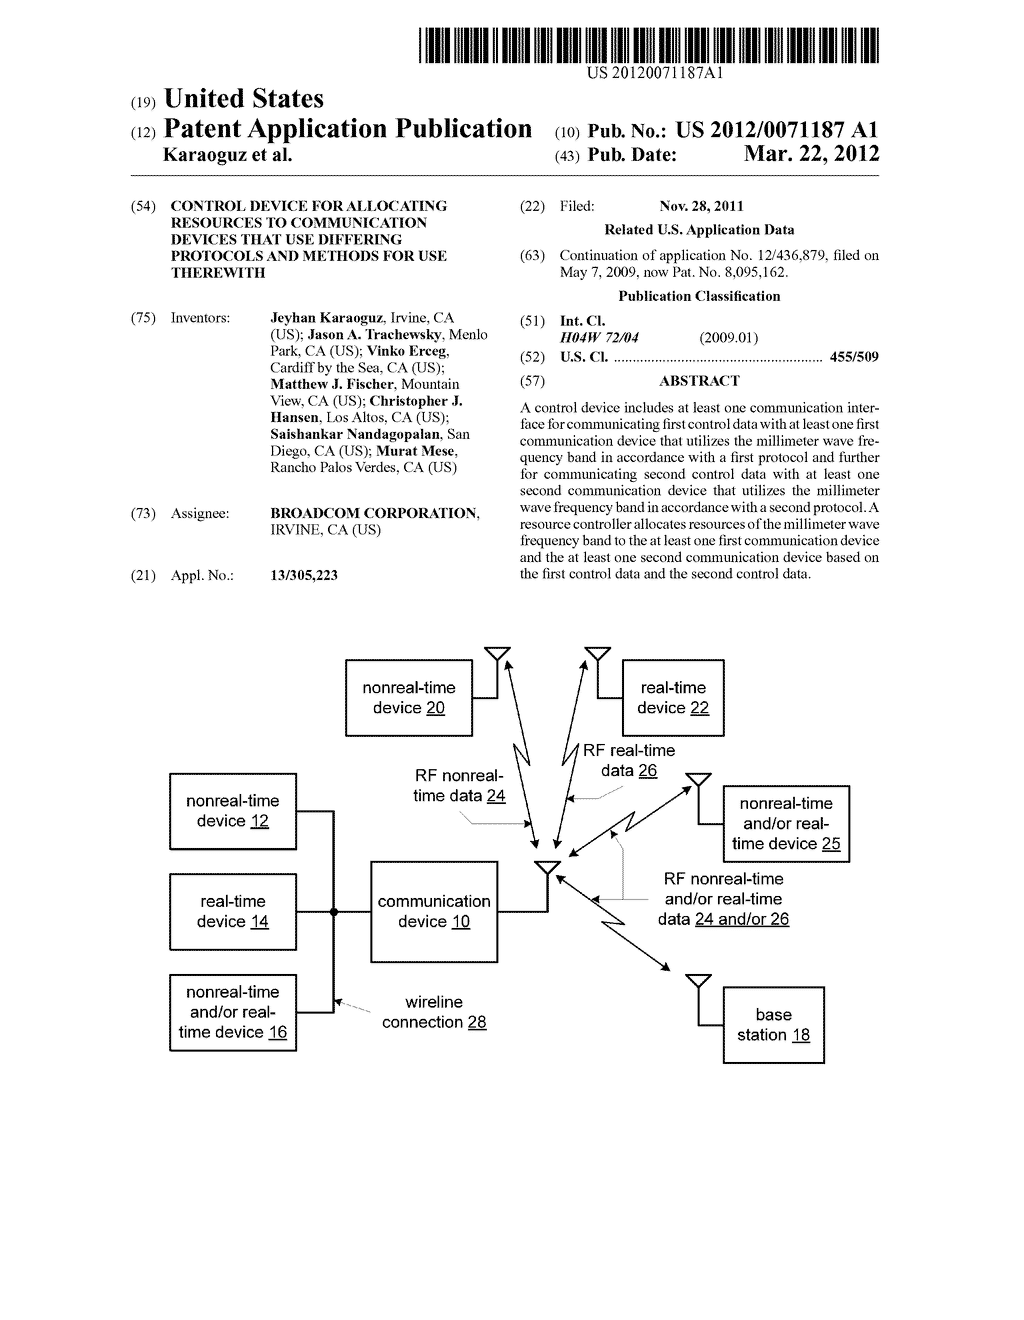 CONTROL DEVICE FOR ALLOCATING RESOURCES TO COMMUNICATION DEVICES THAT USE     DIFFERING PROTOCOLS AND METHODS FOR USE THEREWITH - diagram, schematic, and image 01